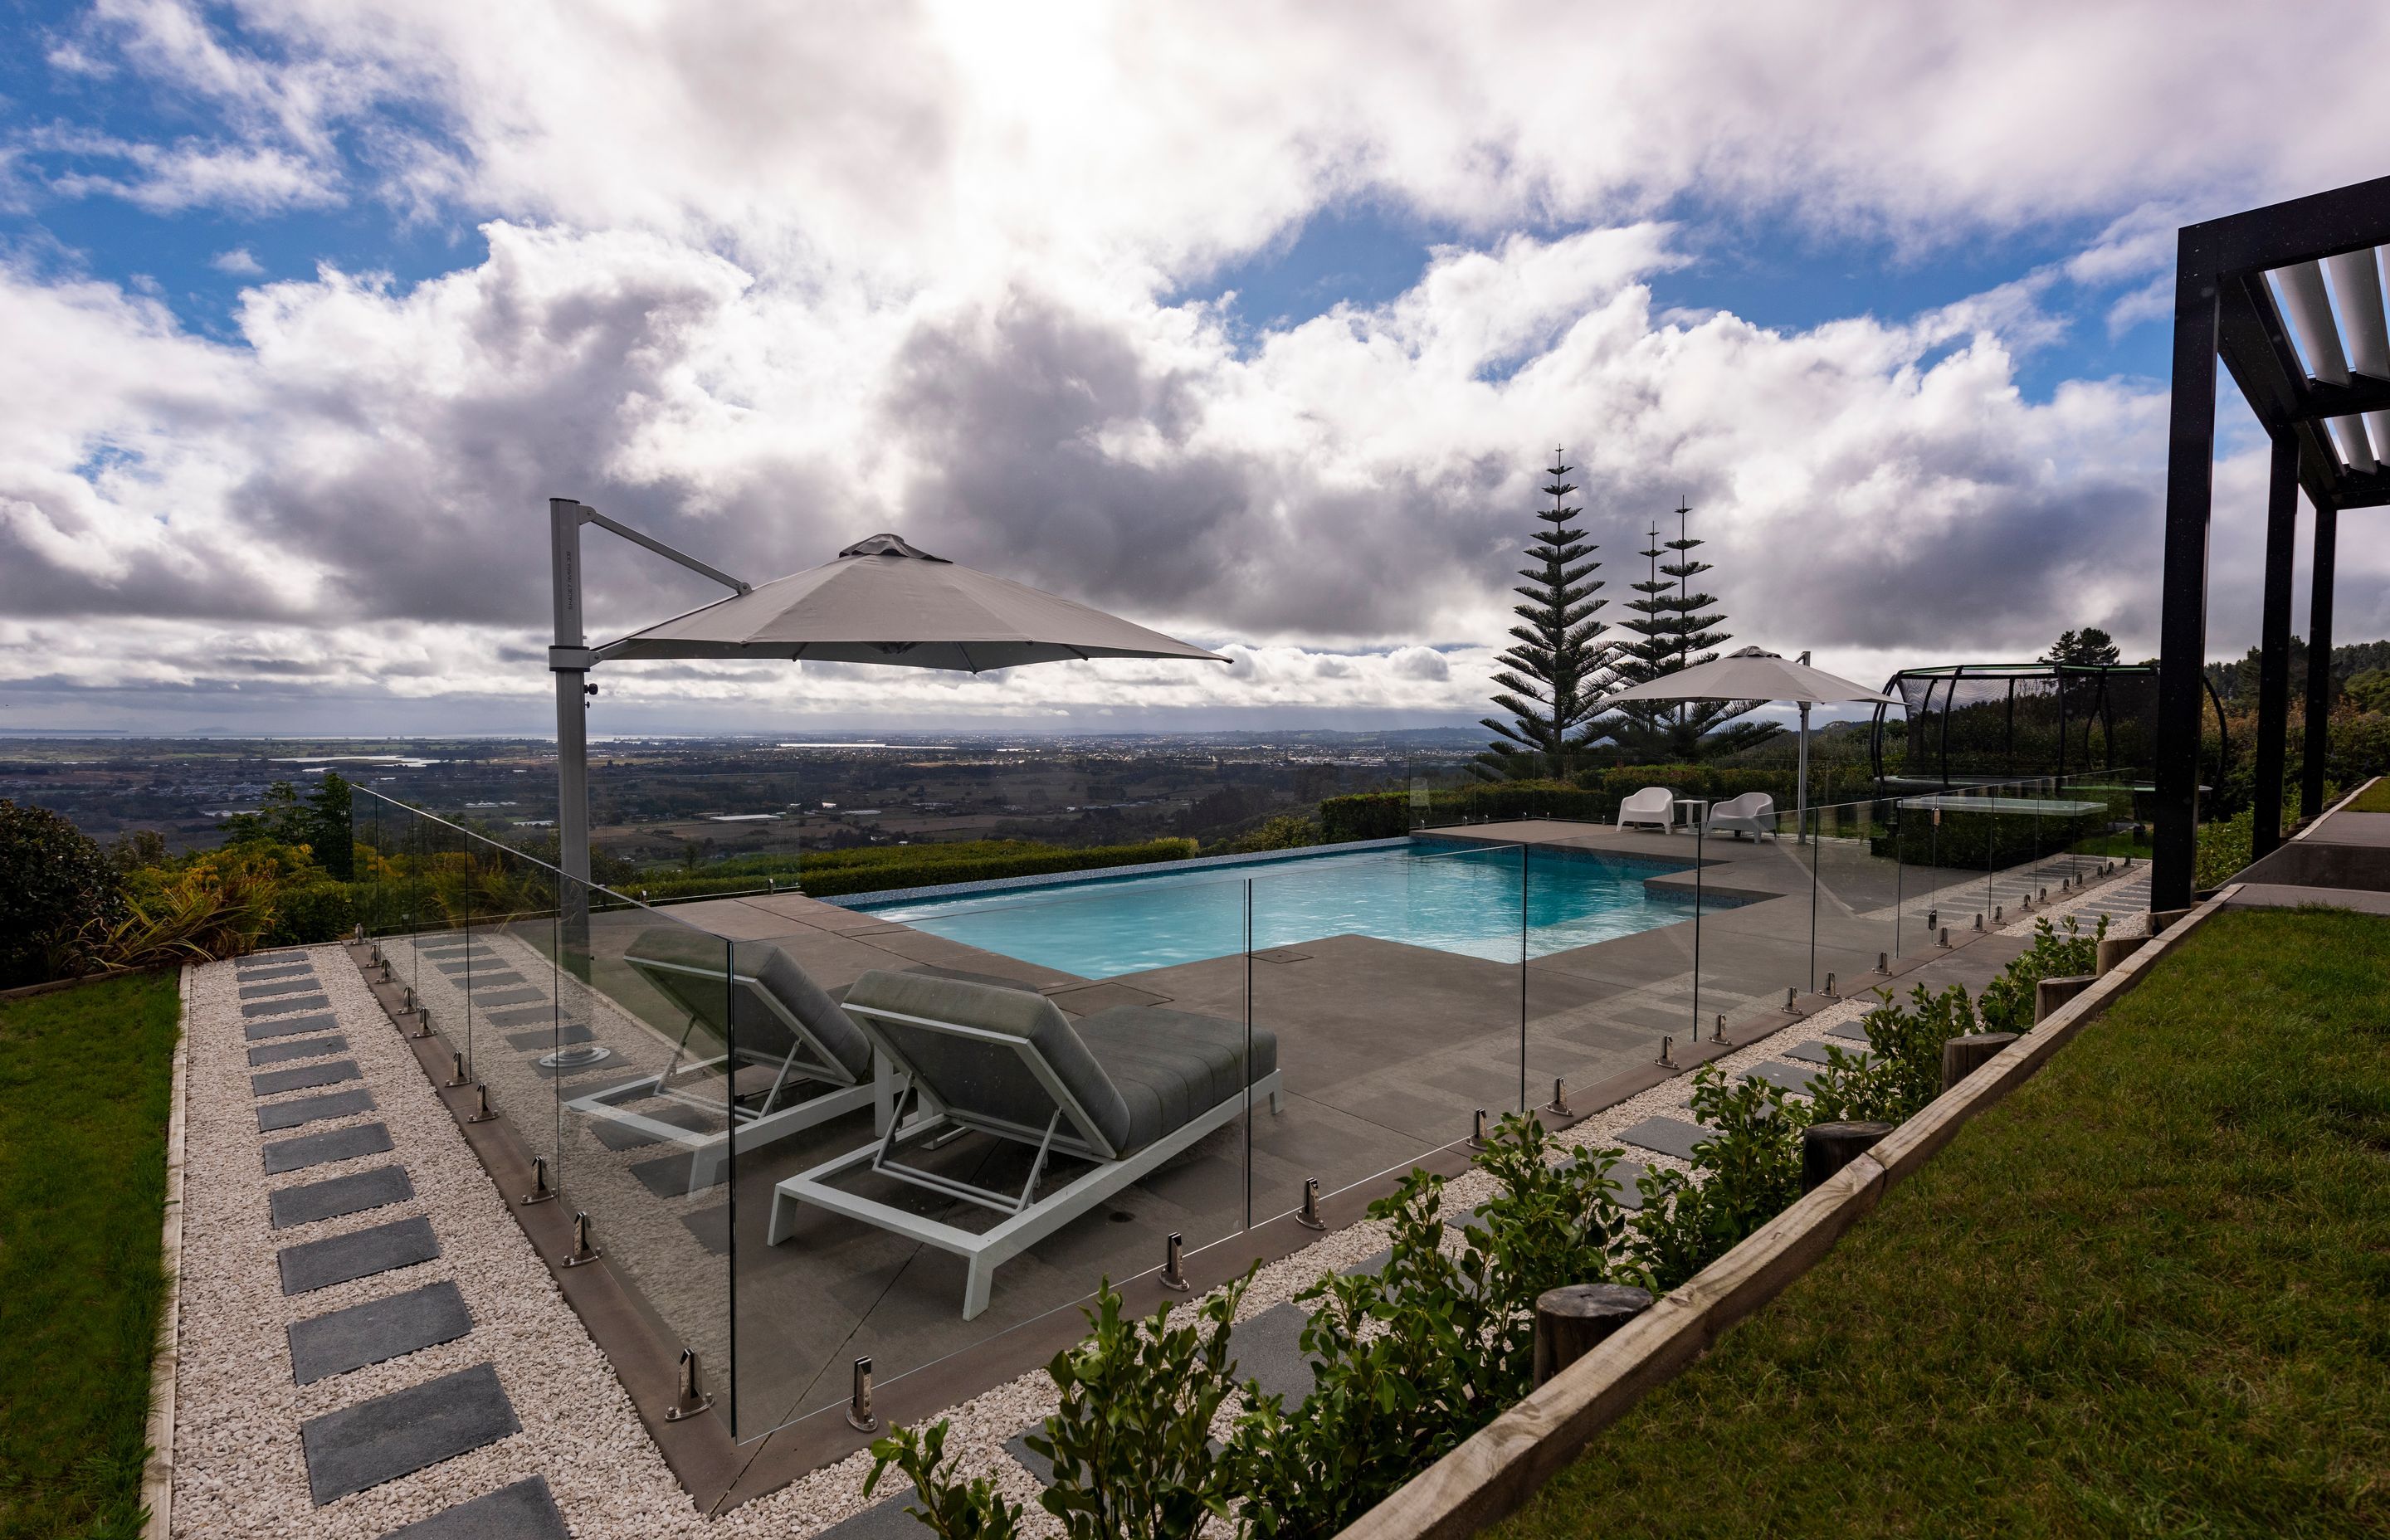 Using the lay of the land this pool features a Horizon Edge